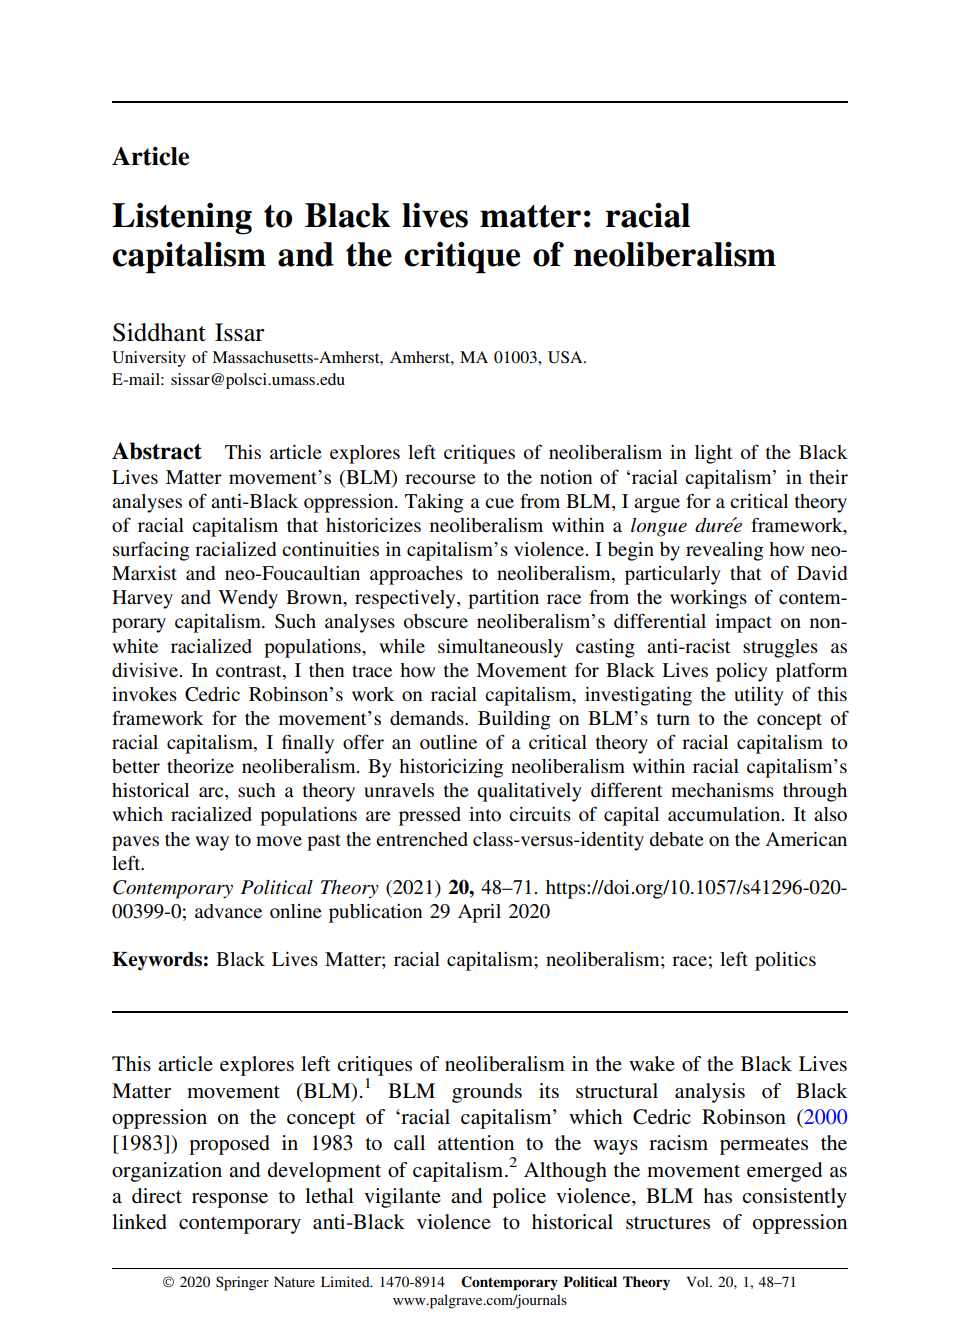 Listening to Black Lives Matter: Racial Capitalism and the Critique of Neoliberalism